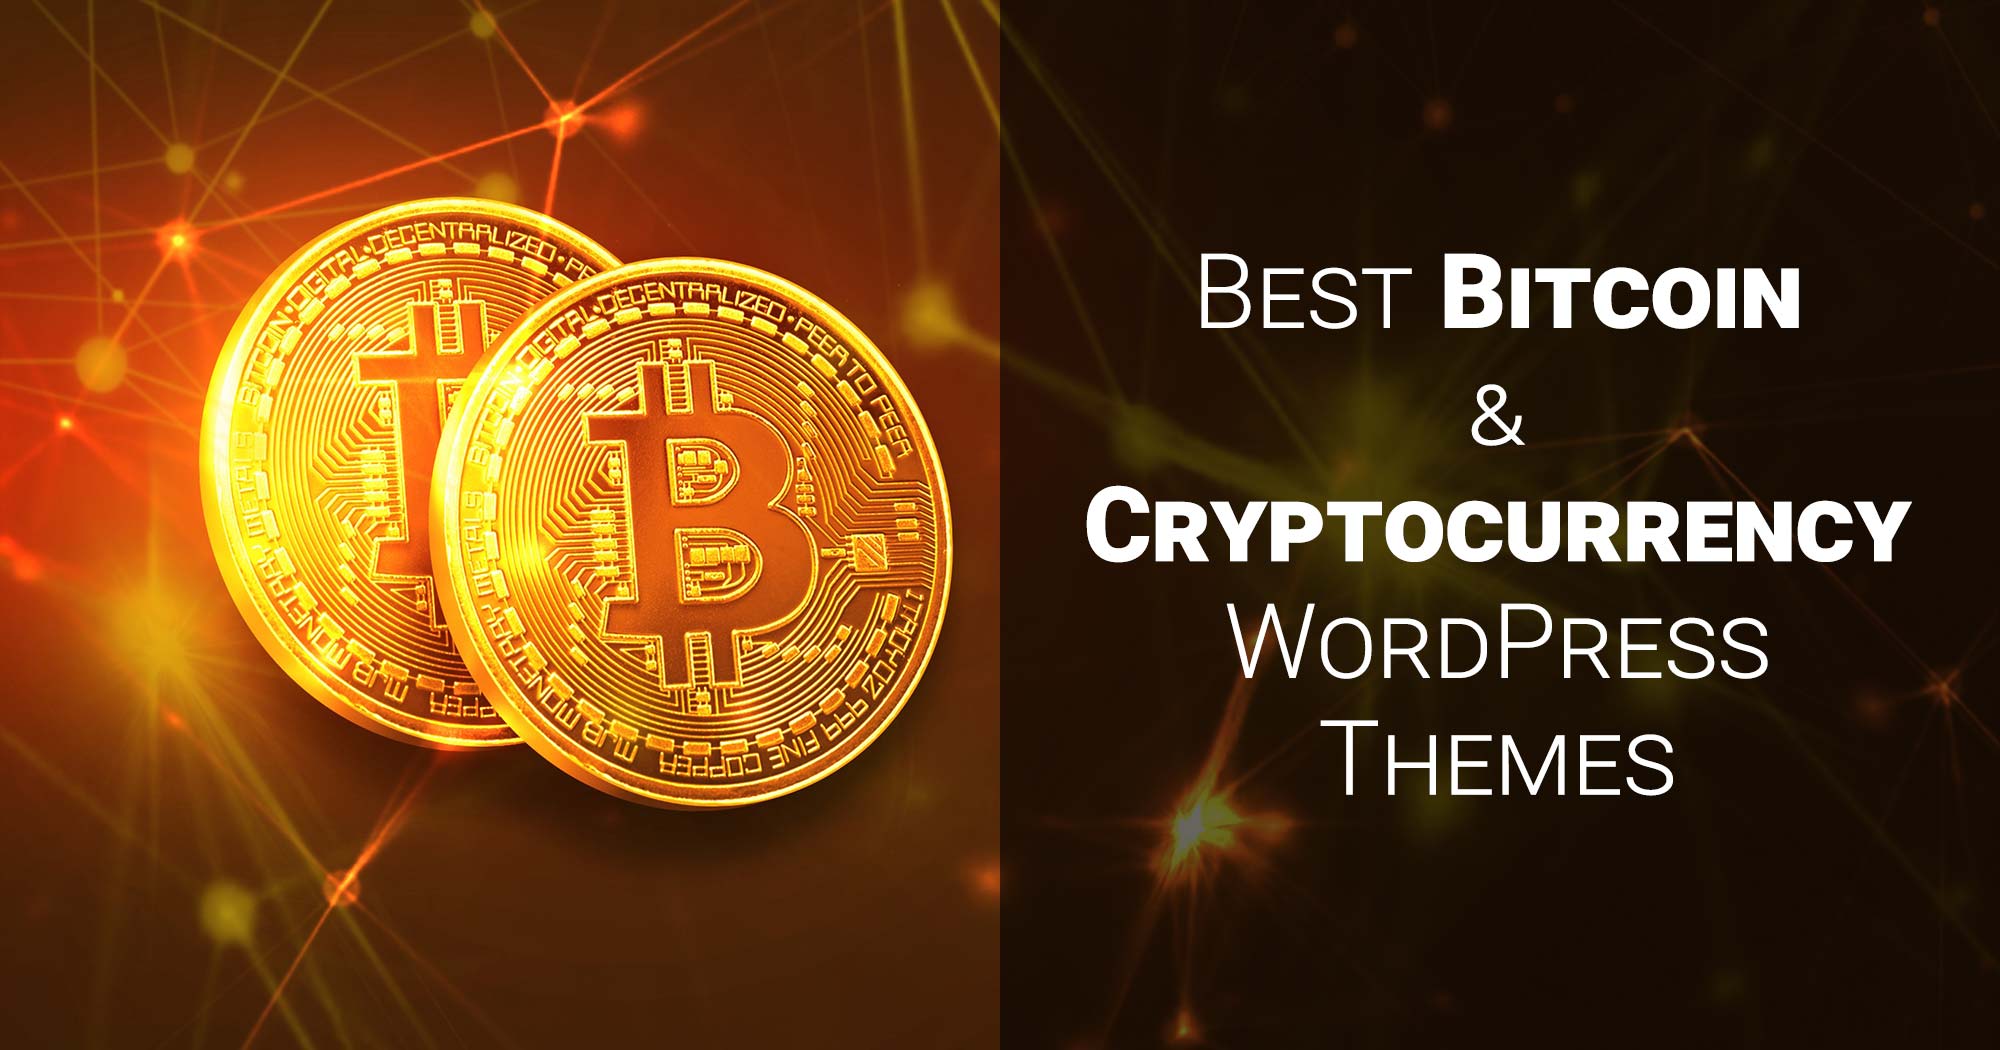 5 Best Bitcoin & Cryptocurrency WordPress Themes 2019 ...